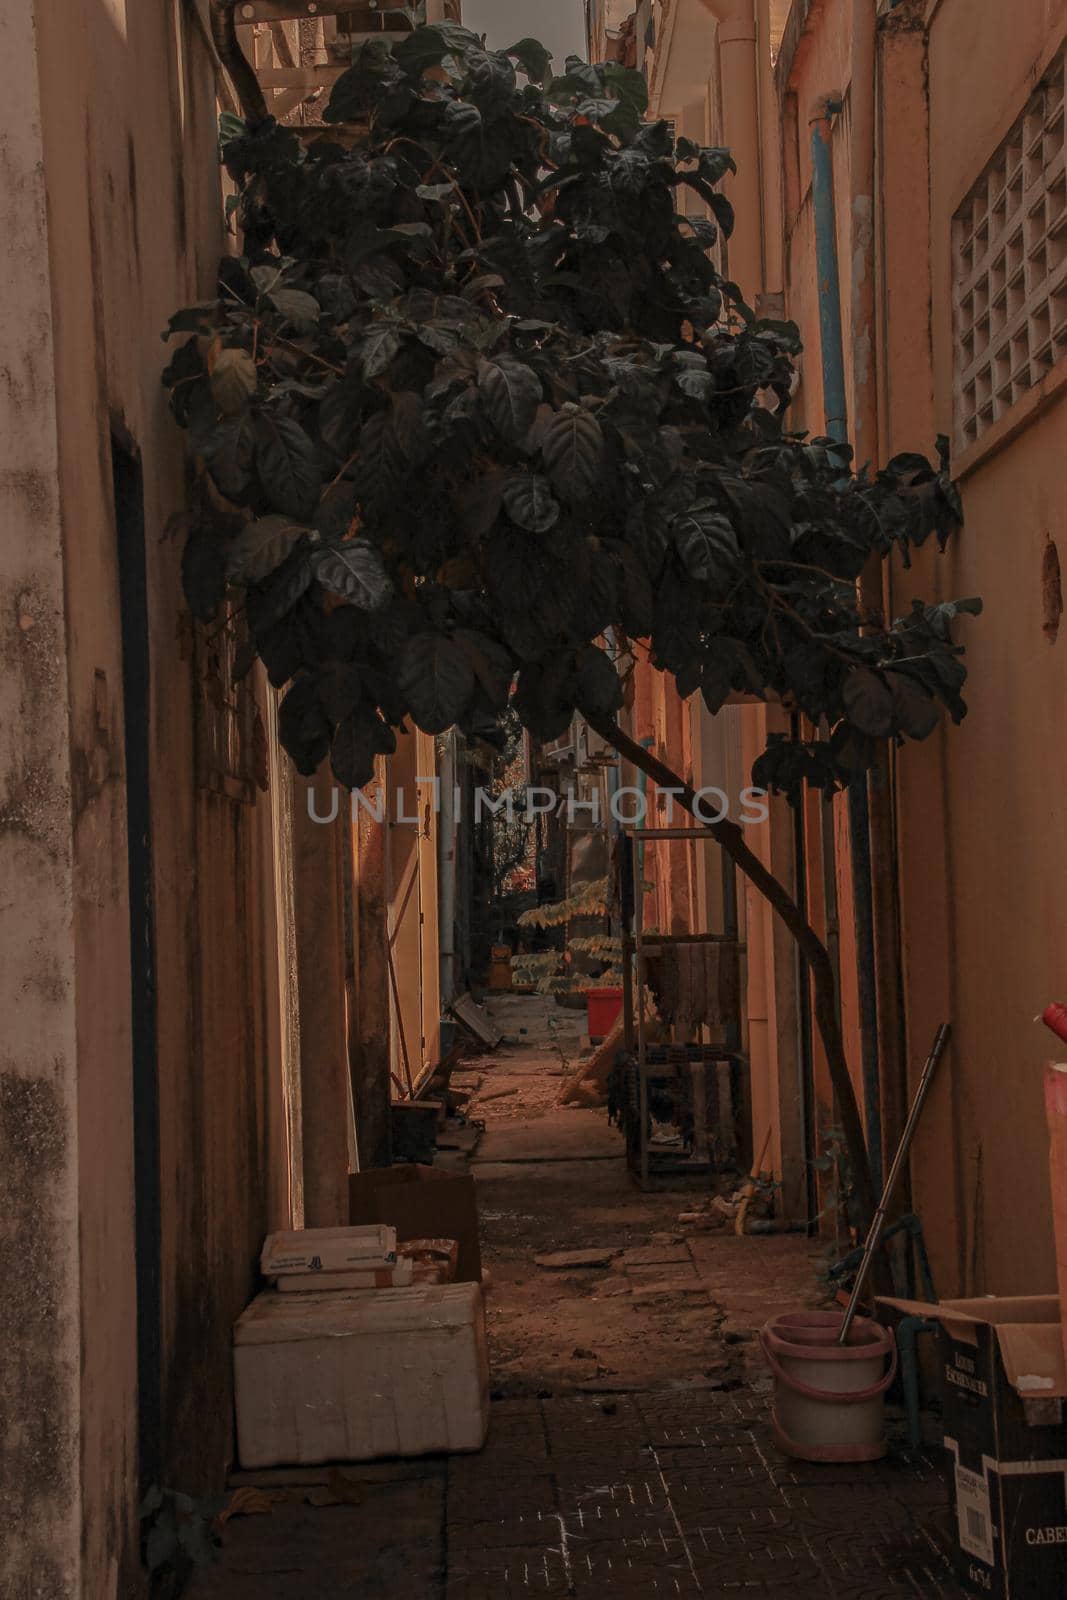 A tree growing in the middle of an alleyway by Sonnet15